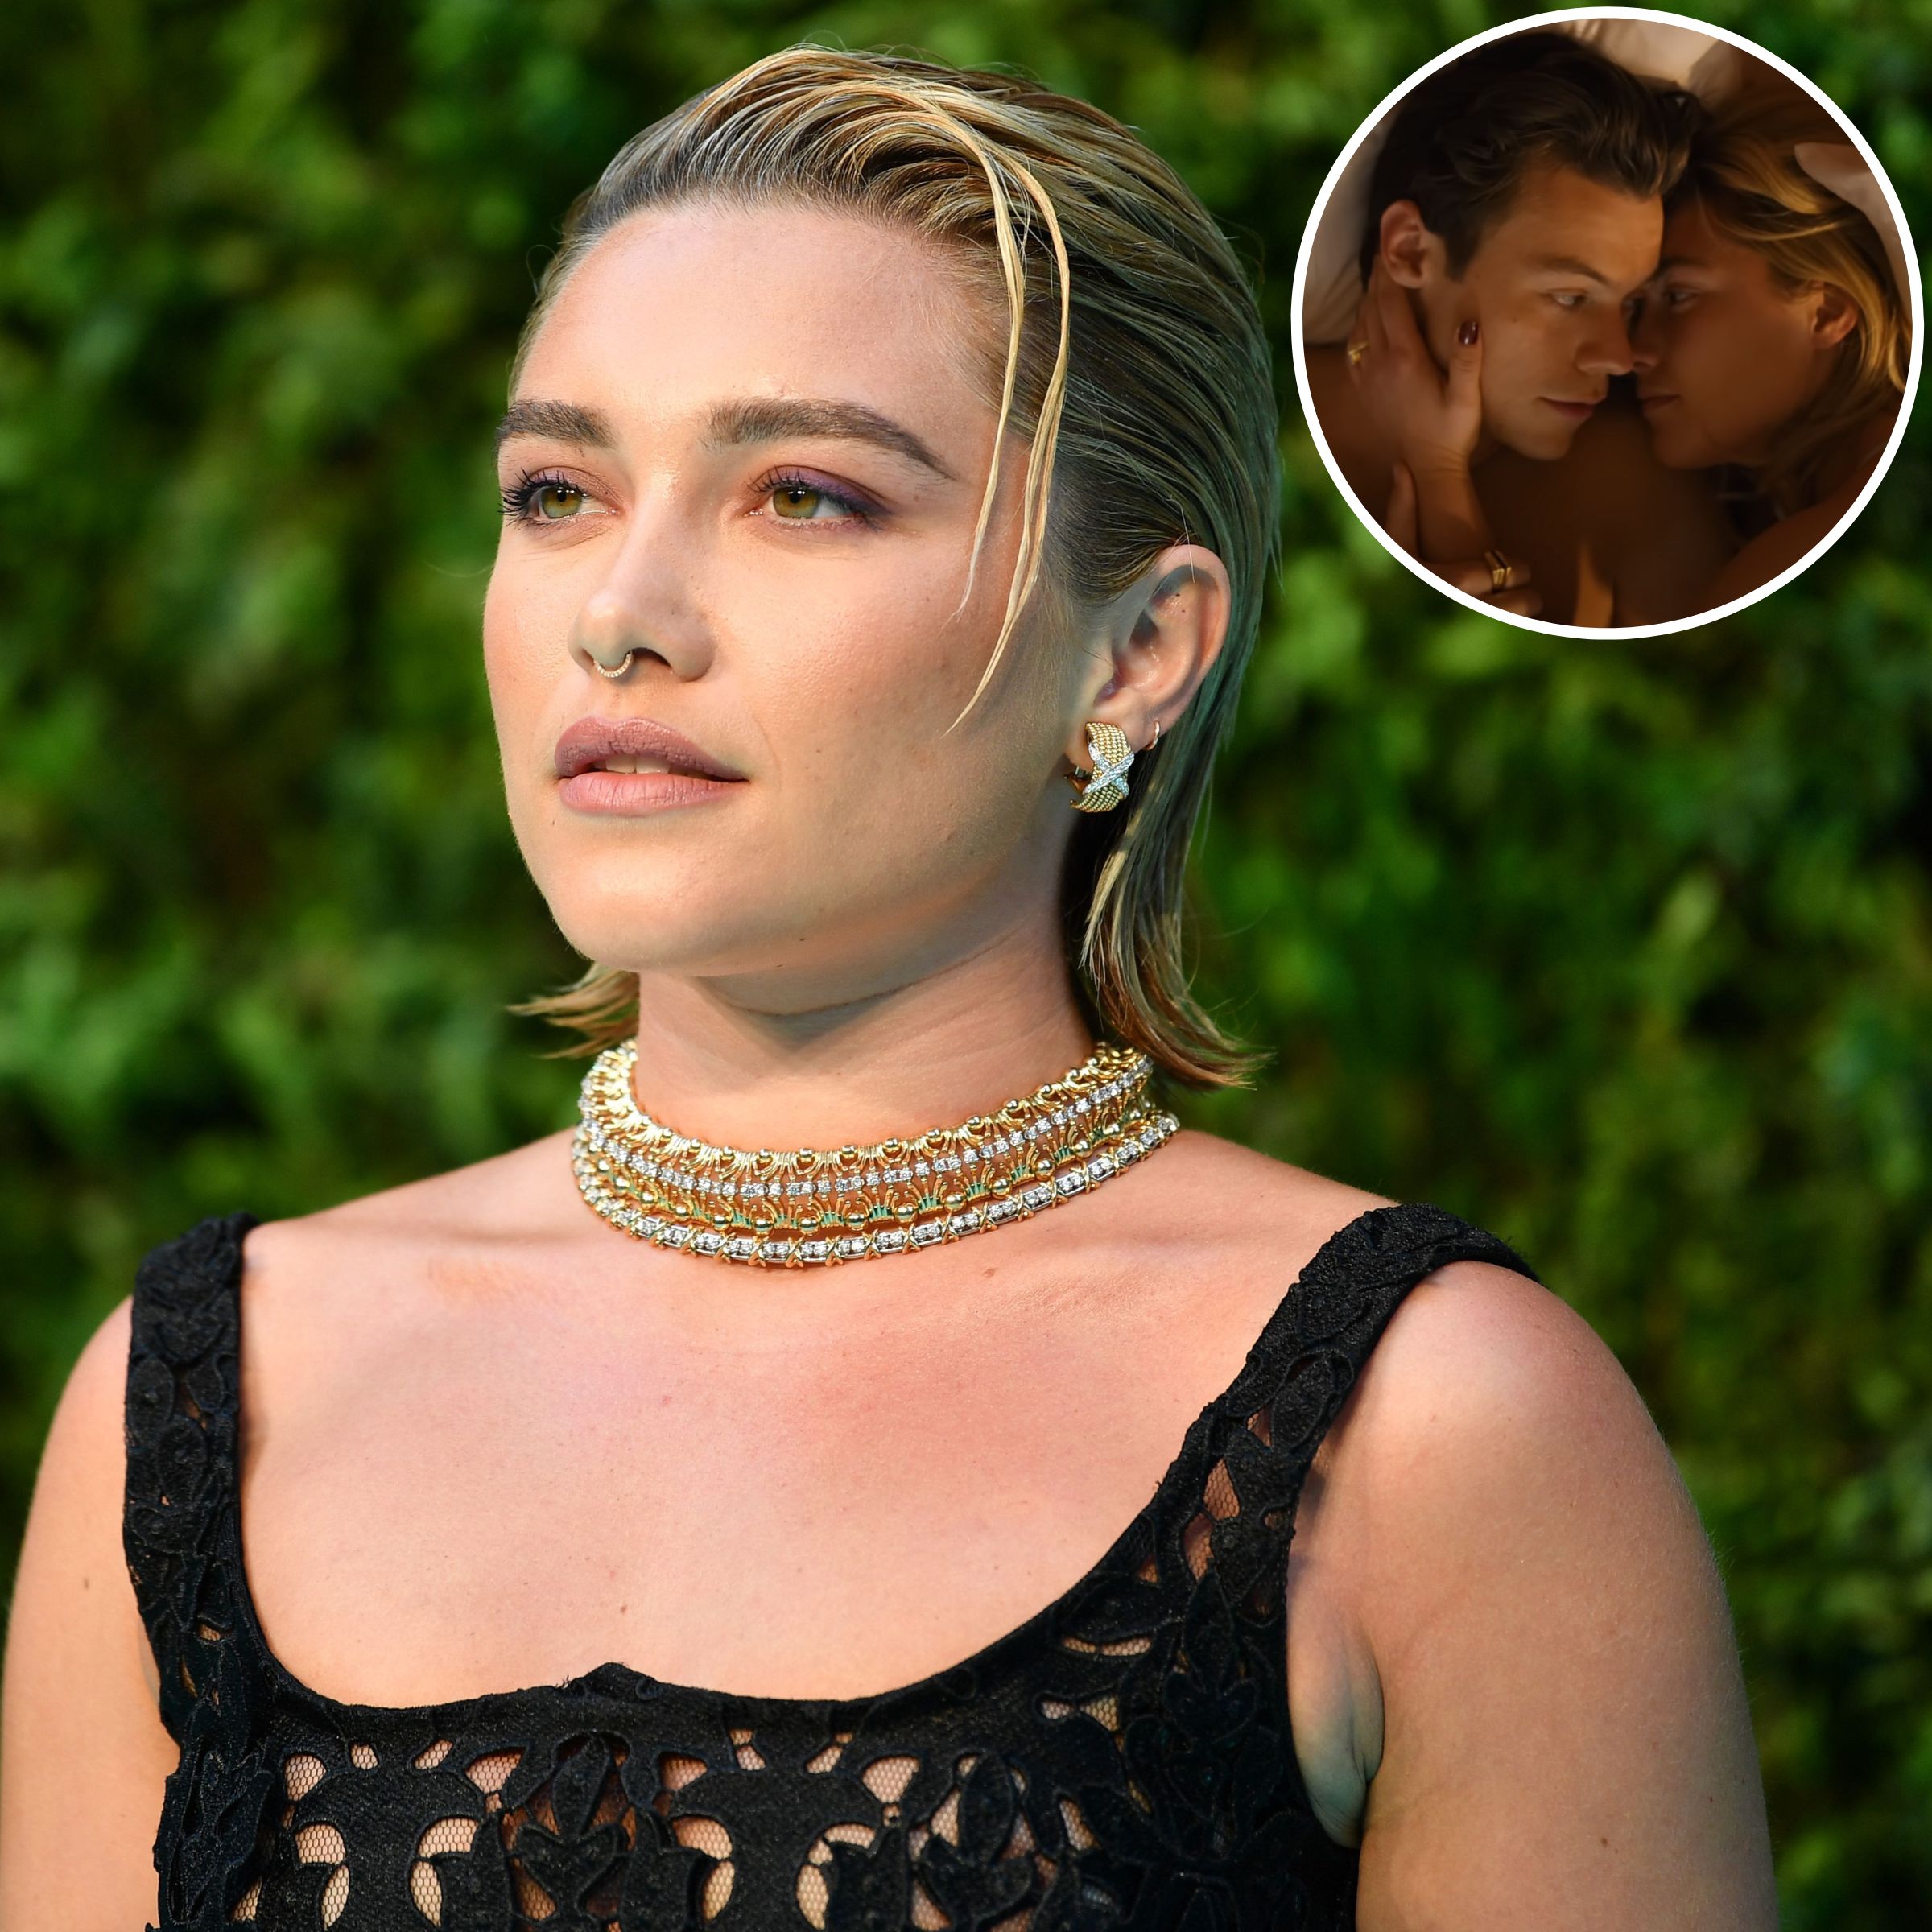 Florence Pugh on Harry Styles Sex Scene in Dont Worry Darling pic